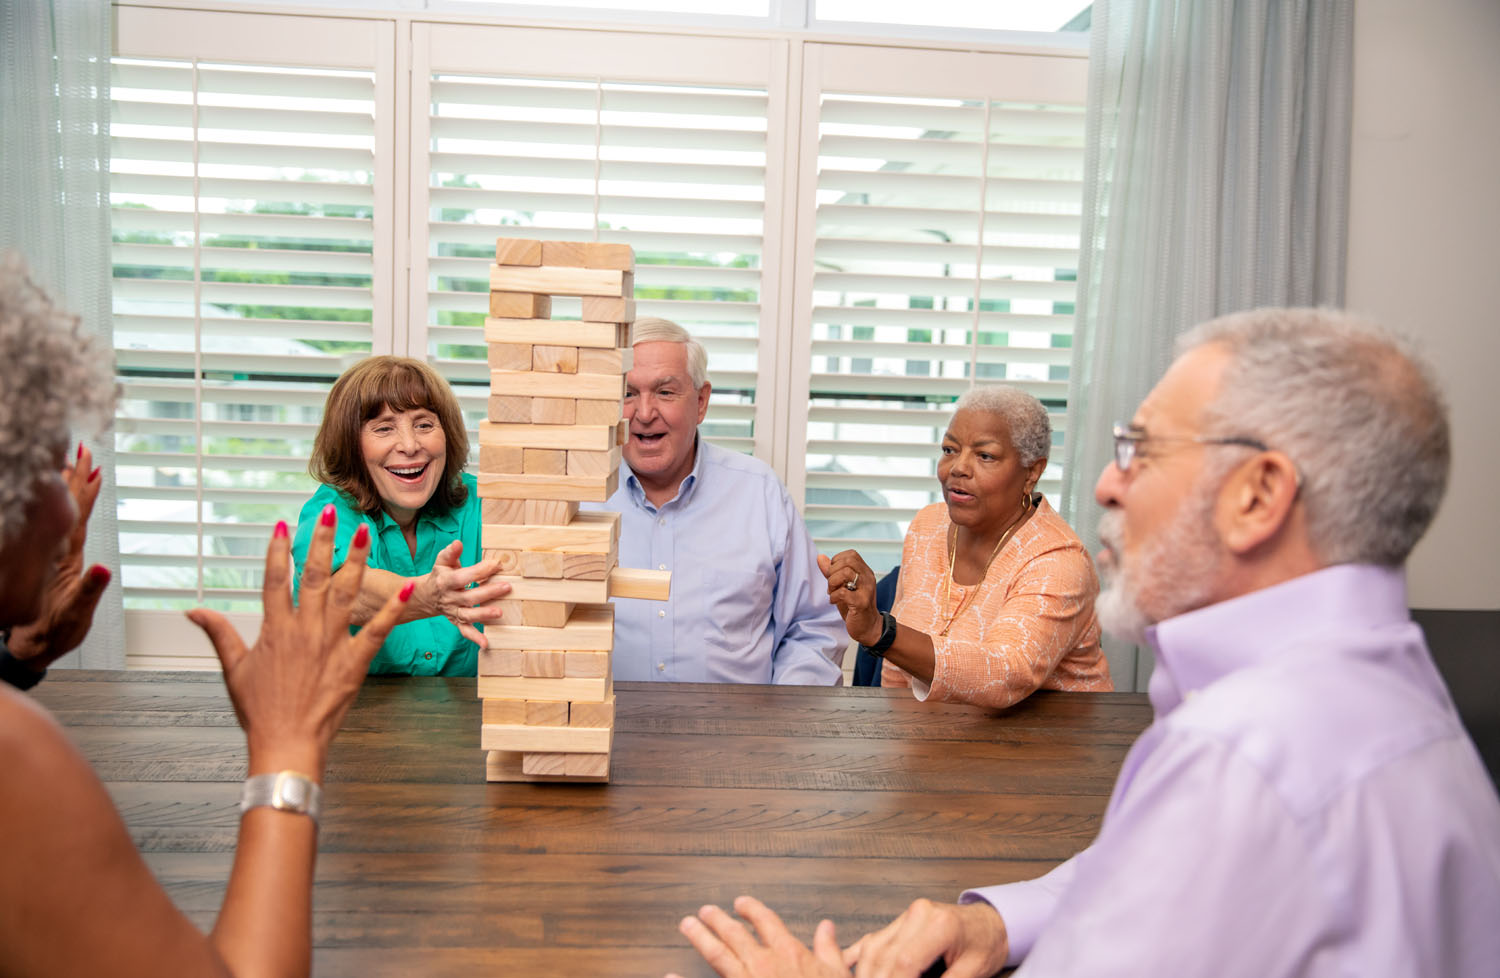 Group of seniors at table, playing a game